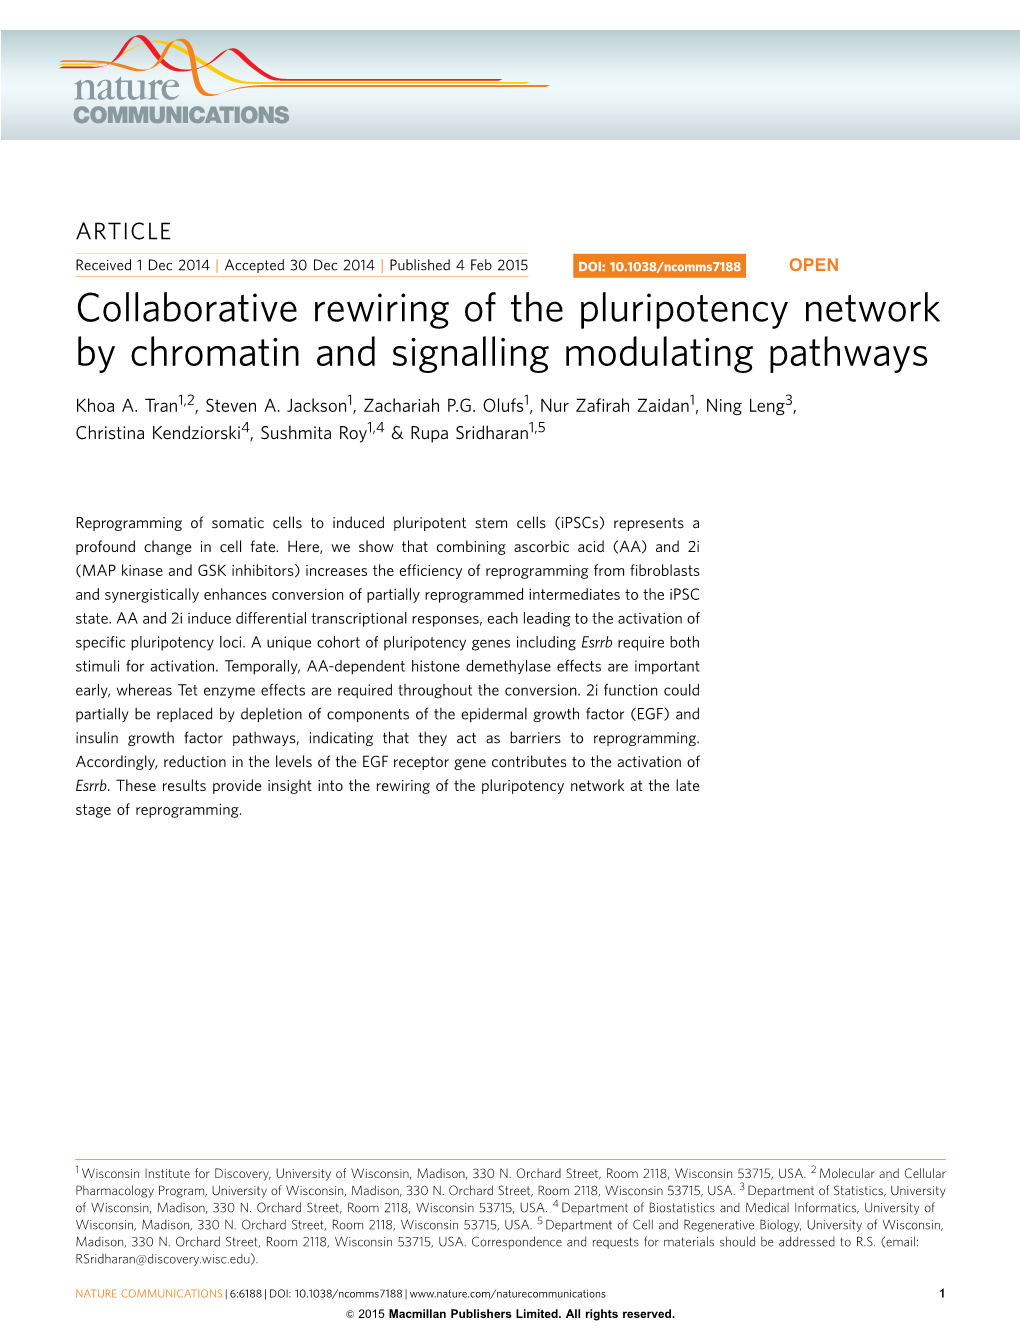 Collaborative Rewiring of the Pluripotency Network by Chromatin and Signalling Modulating Pathways